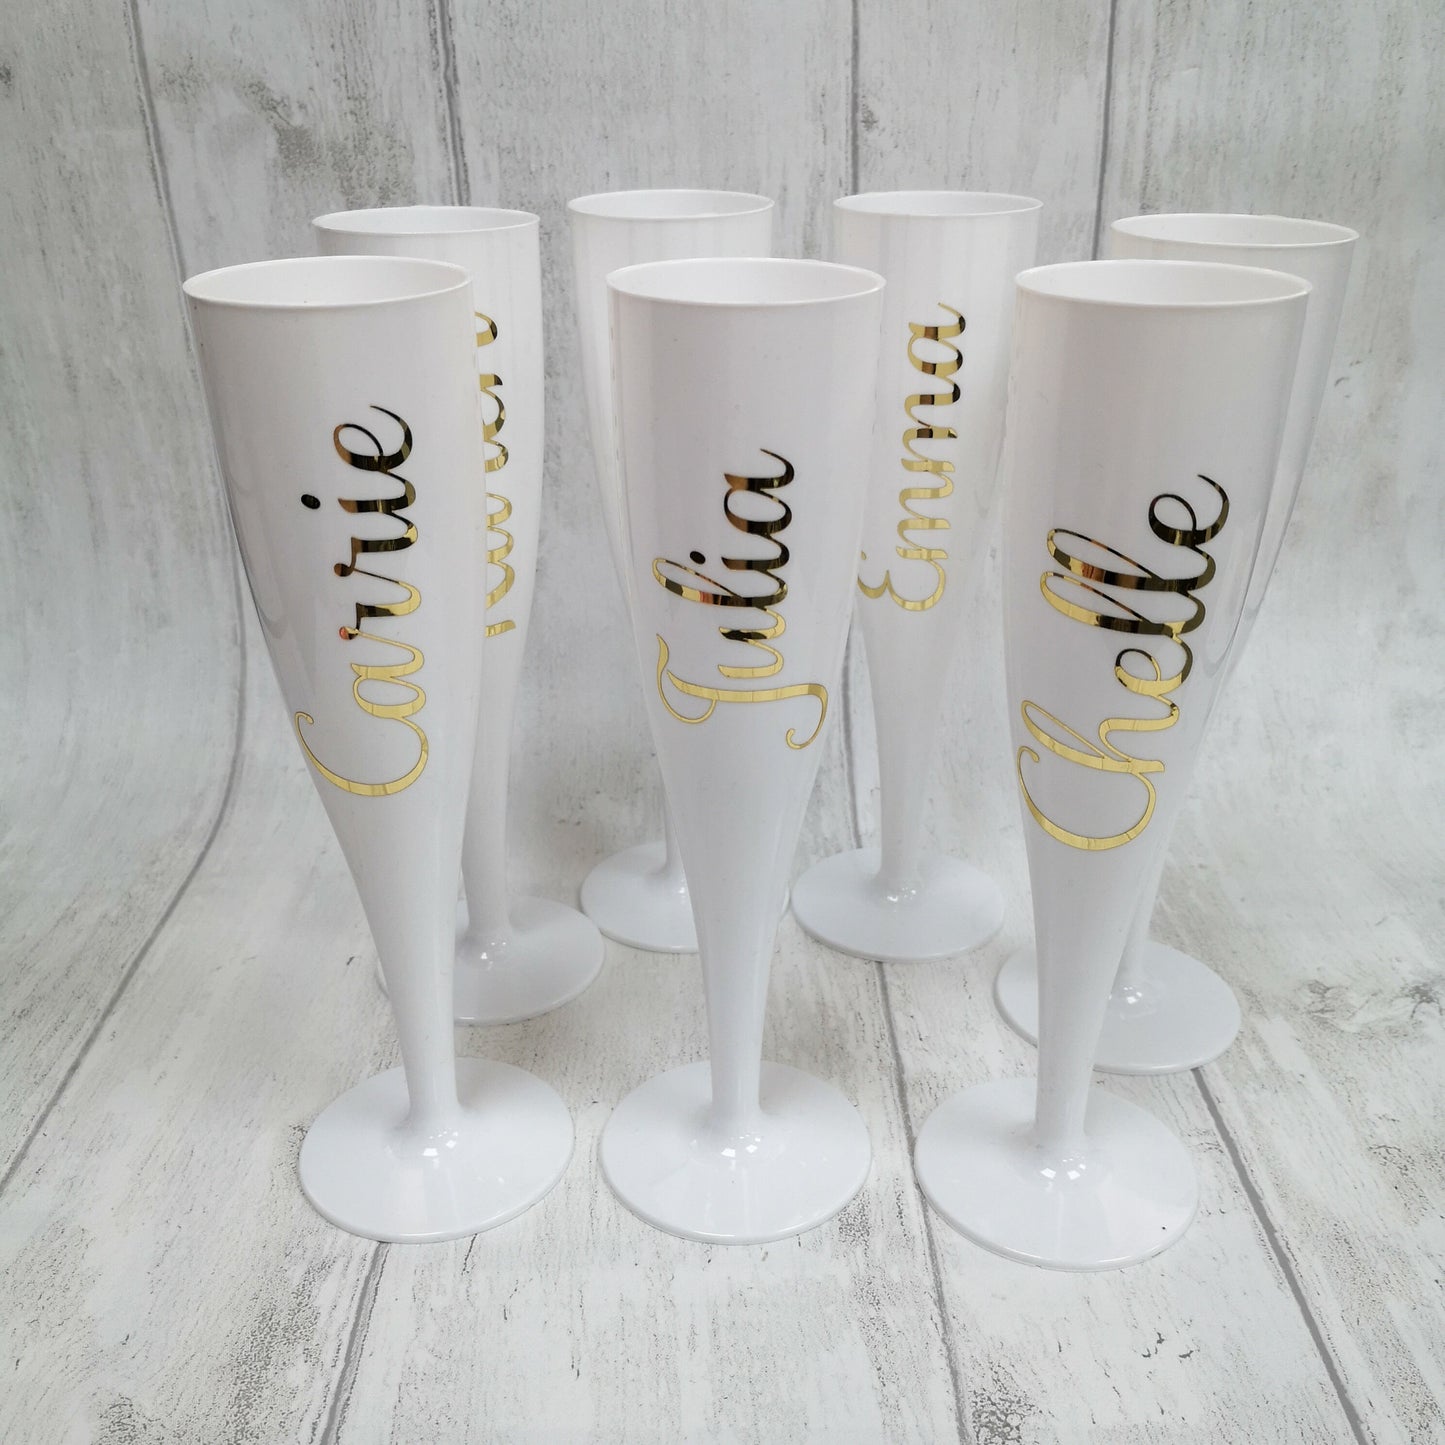 Personalised Hen Party Cup,  Bridesmaid Champagne Flutes, Bridesmaid Gifts, Hen Party Gifts